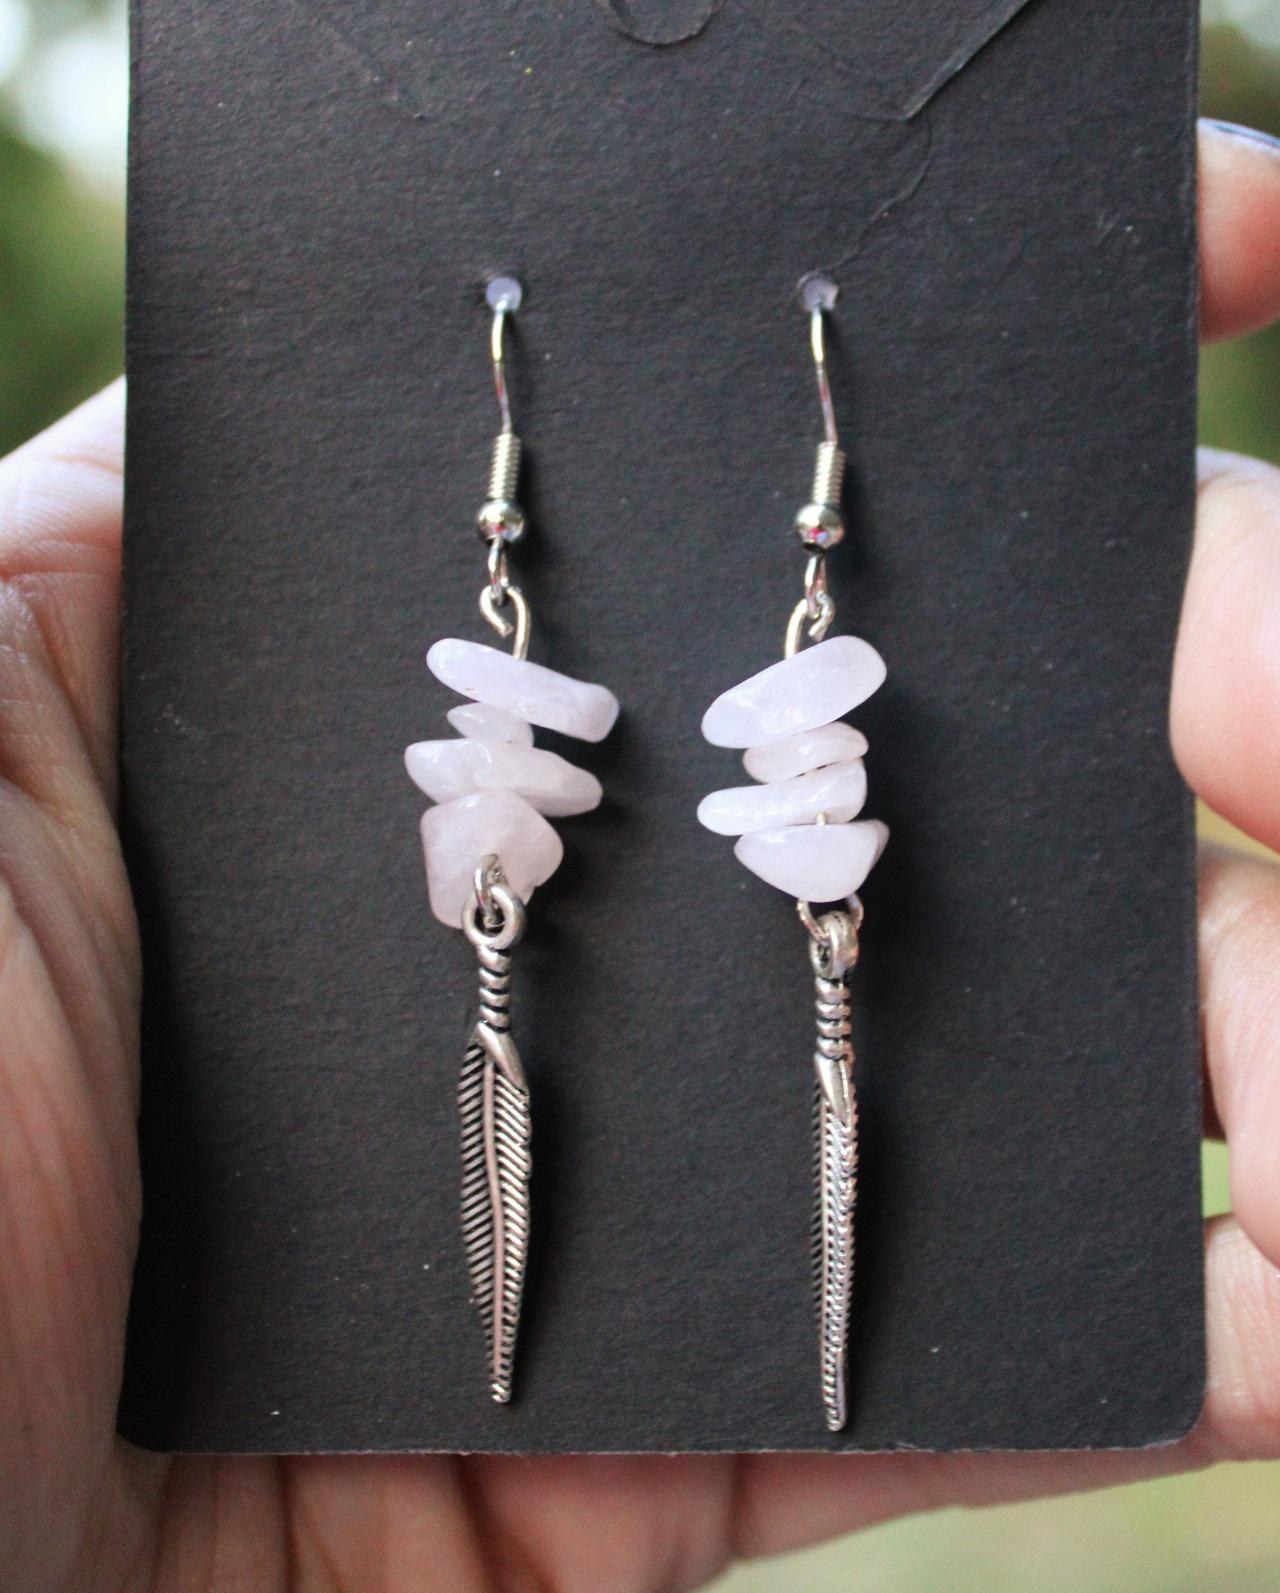 Rose Quartz Dangle Gemstone Earrings Silver Feather For Healing Handmade Jewelry Made In The Us Pink Rose Quartz Chips Drop Earrings